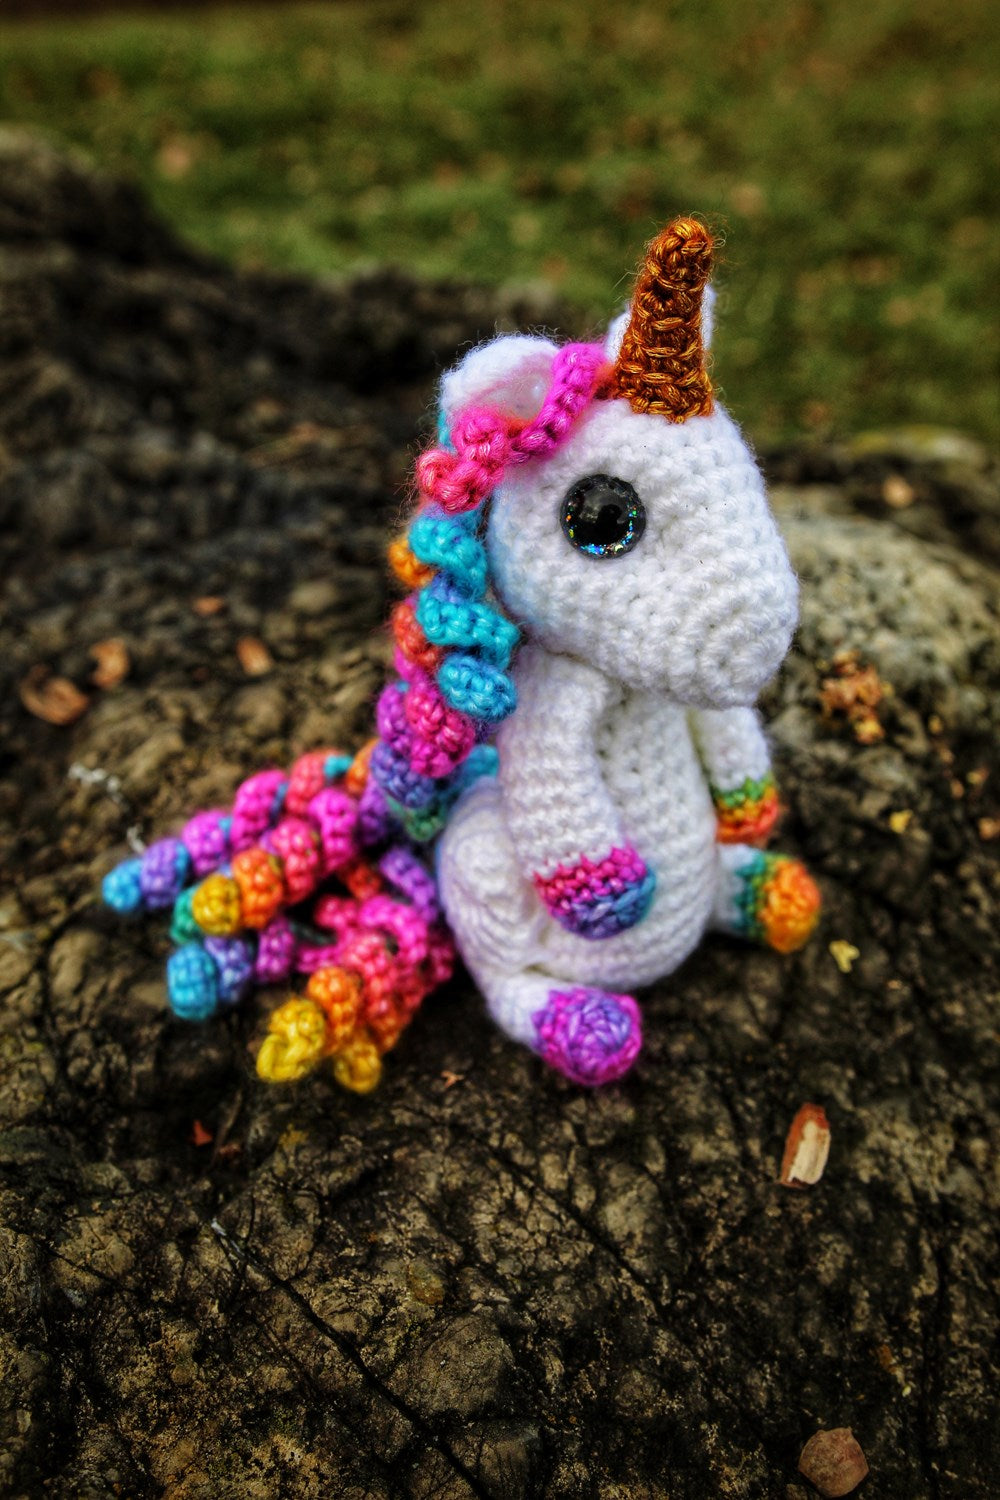 Crochet Creatures of Myth and Legend by Megan Lapp